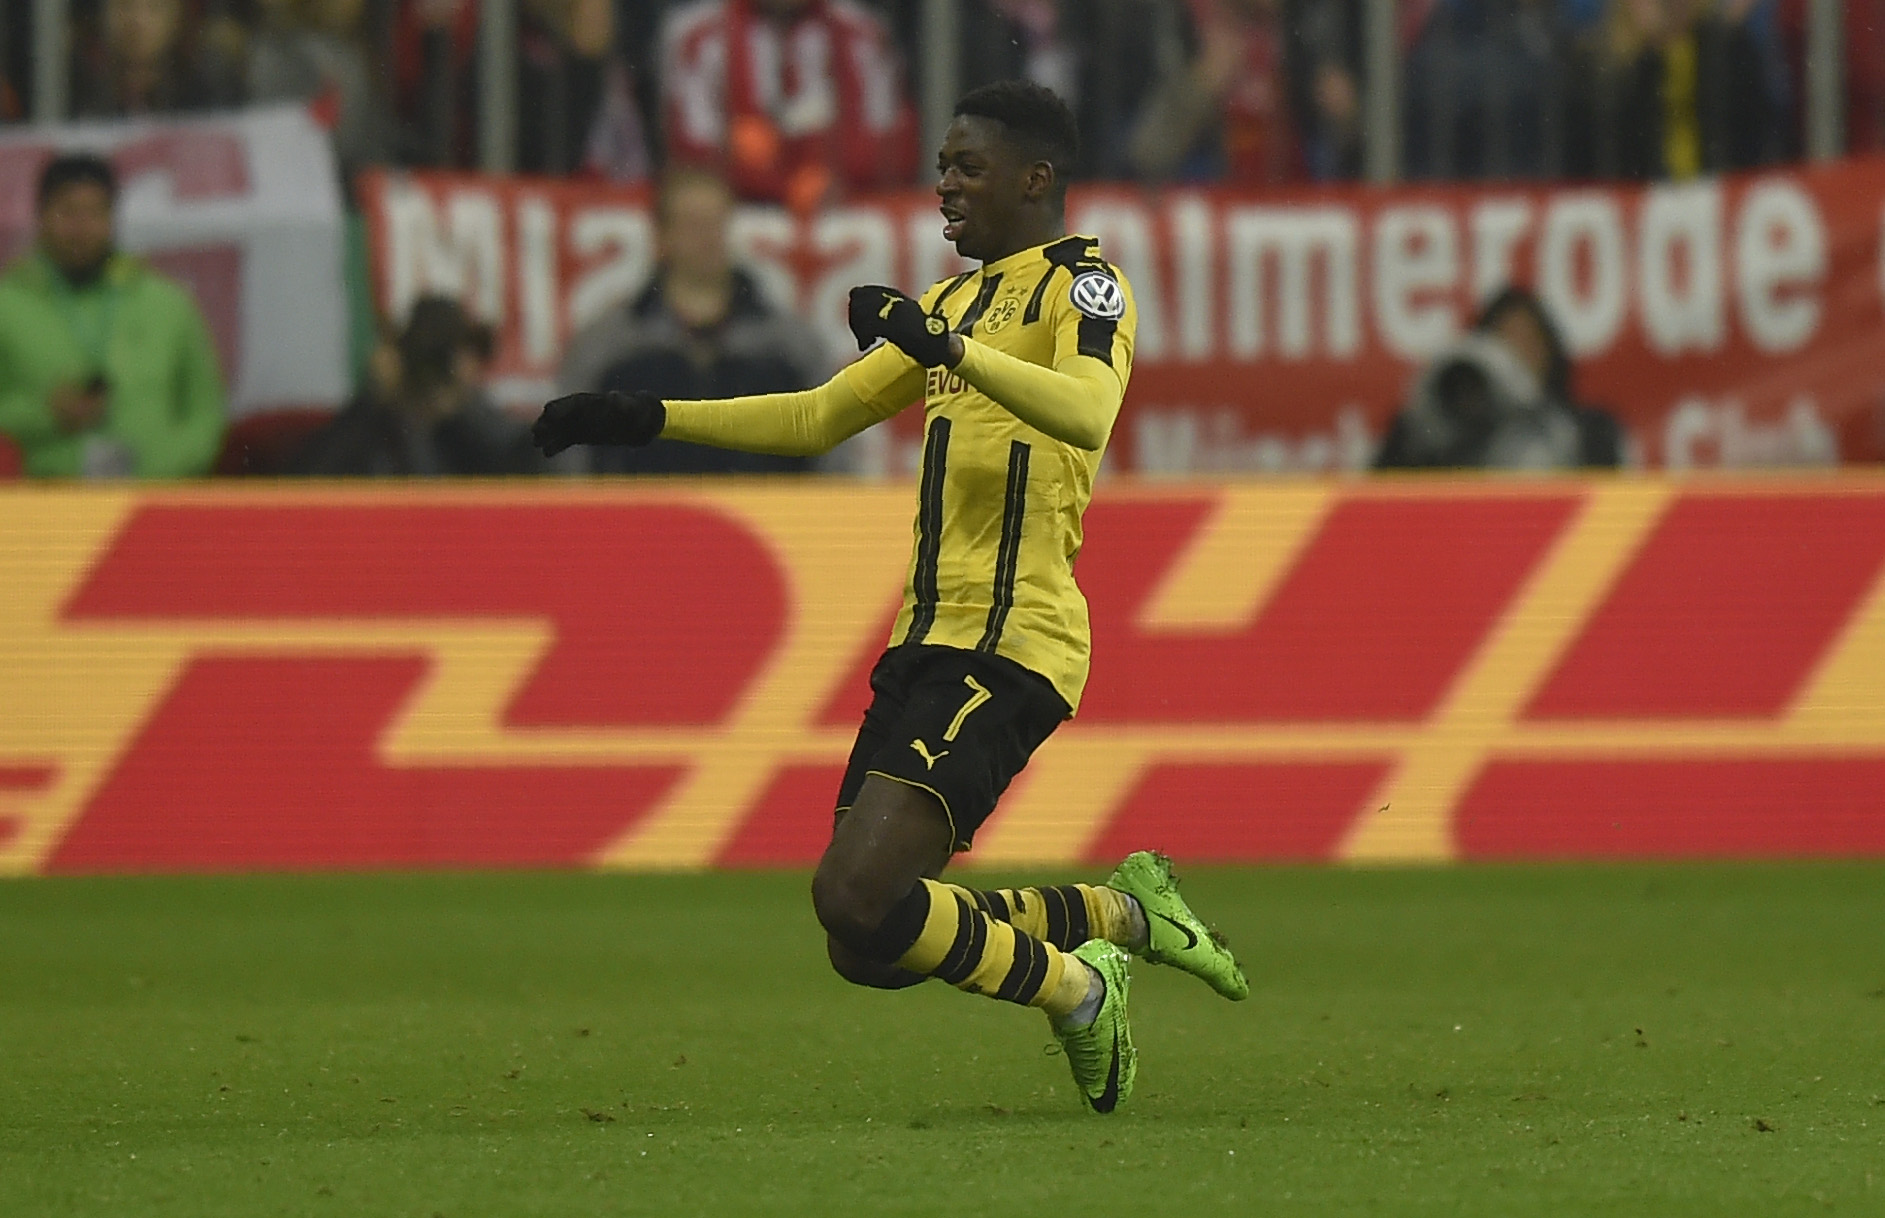 Dortmund's French midfielder Ousmane Dembele celebrate after the second goal for Dortmund during the German Cup DFB Pokal semifinal football match between FC Bayern Munich and BVB Borussia Dortmund in Munich, on April 26, 2017. / AFP PHOTO / GUENTER SCHIFFMANN / RESTRICTIONS: ACCORDING TO DFB RULES IMAGE SEQUENCES TO SIMULATE VIDEO IS NOT ALLOWED DURING MATCH TIME. MOBILE (MMS) USE IS NOT ALLOWED DURING AND FOR FURTHER TWO HOURS AFTER THE MATCH. == RESTRICTED TO EDITORIAL USE == FOR MORE INFORMATION CONTACT DFB DIRECTLY AT +49 69 67880

 /         (Photo credit should read GUENTER SCHIFFMANN/AFP/Getty Images)